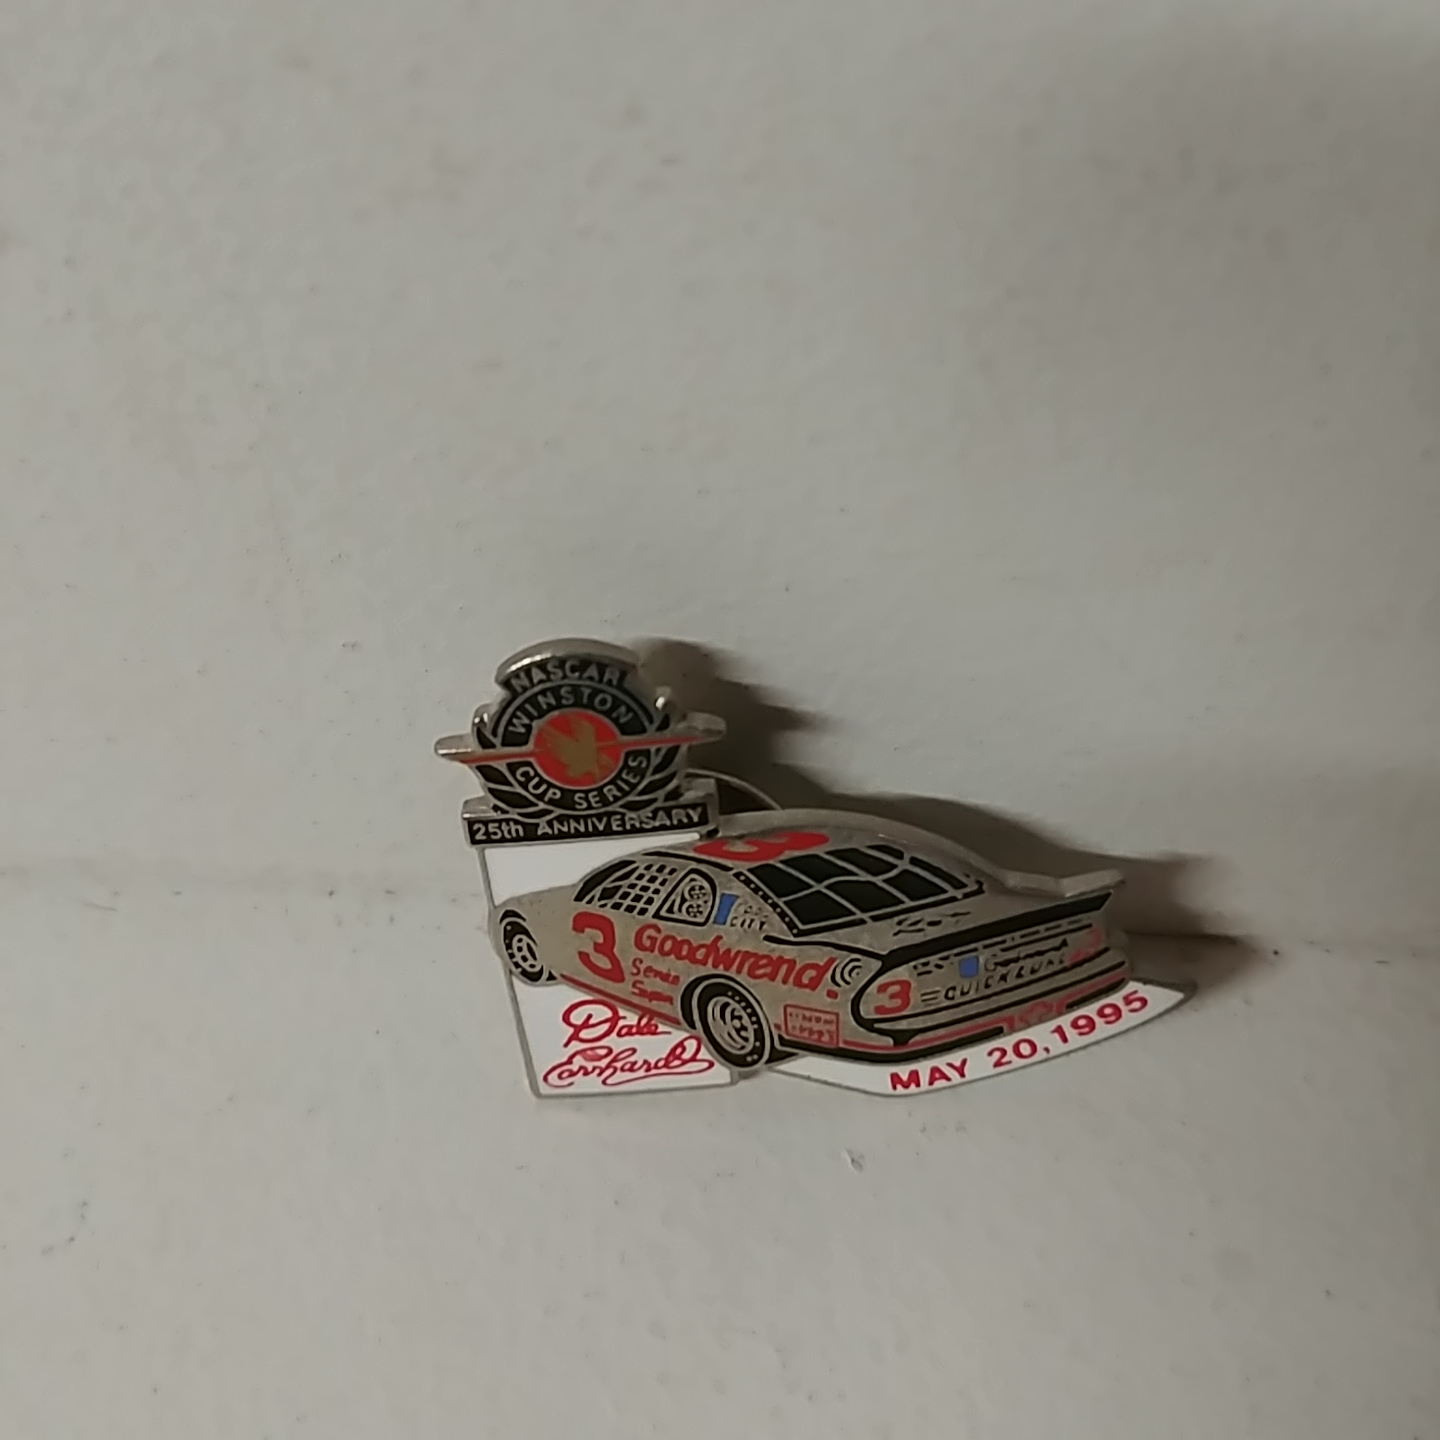 1995 Dale Earnhardt GMGW "Nascar Winston Cup 25th Anniversary" hatpin